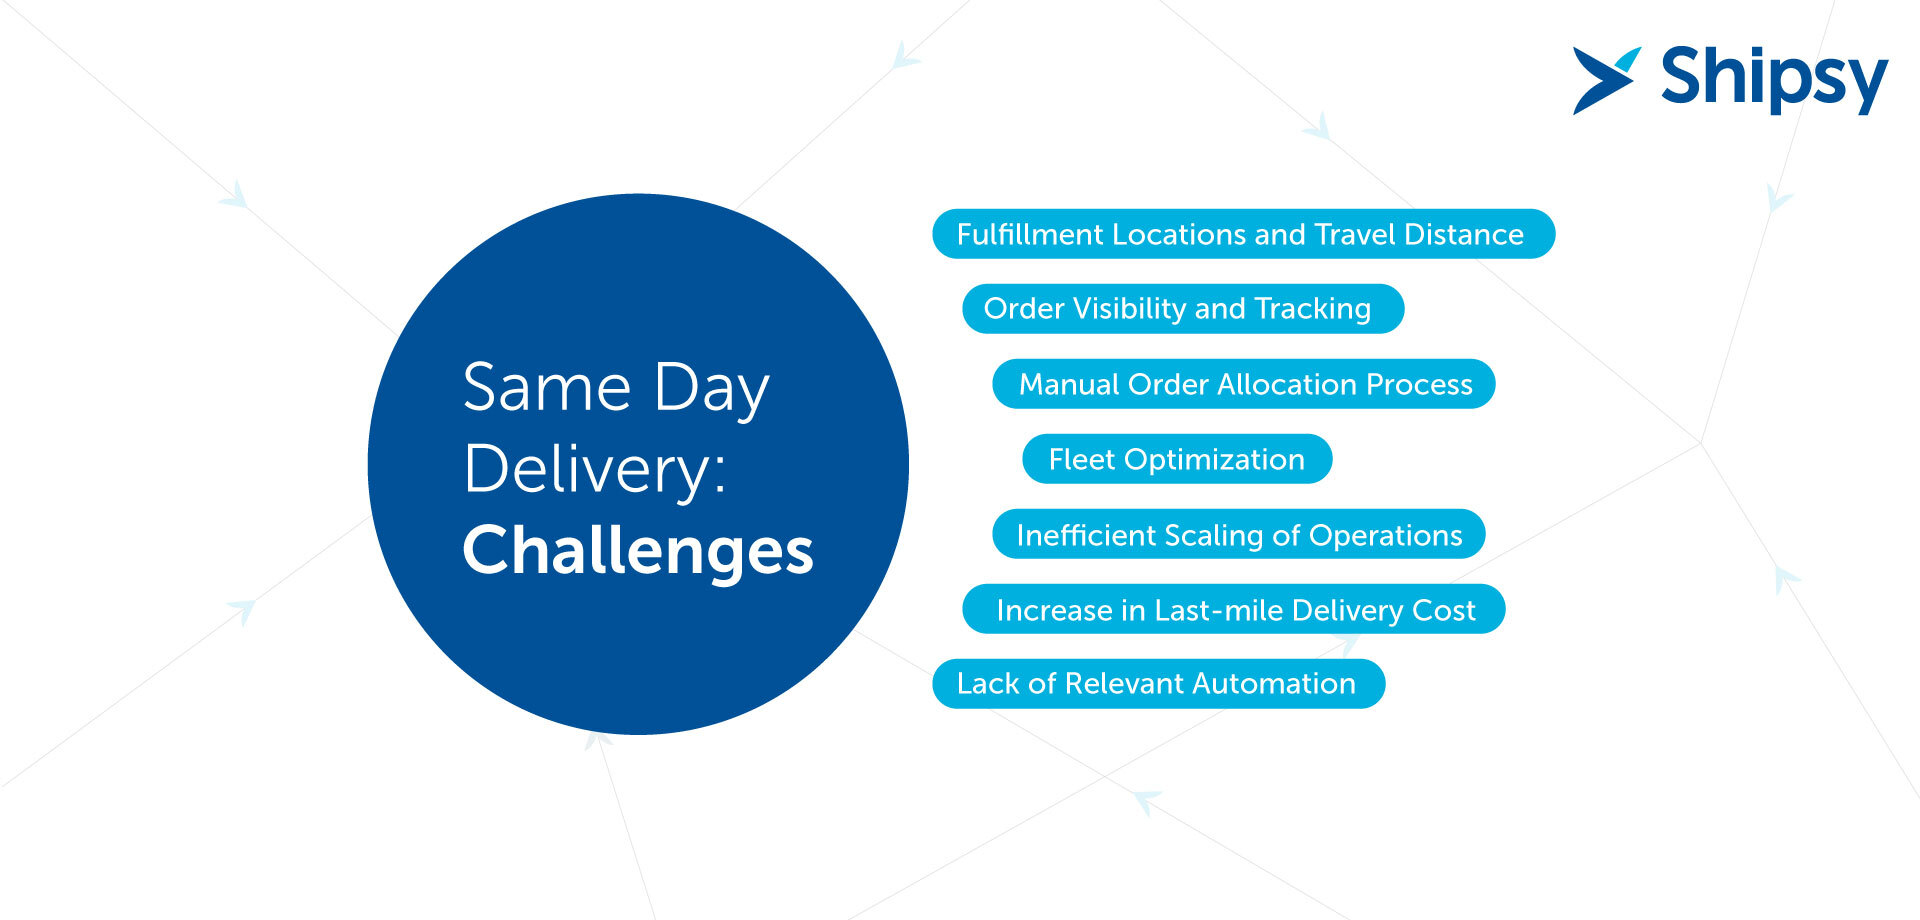 Day: Get All Your Deliveries on the Same Day - Make Tech Easier